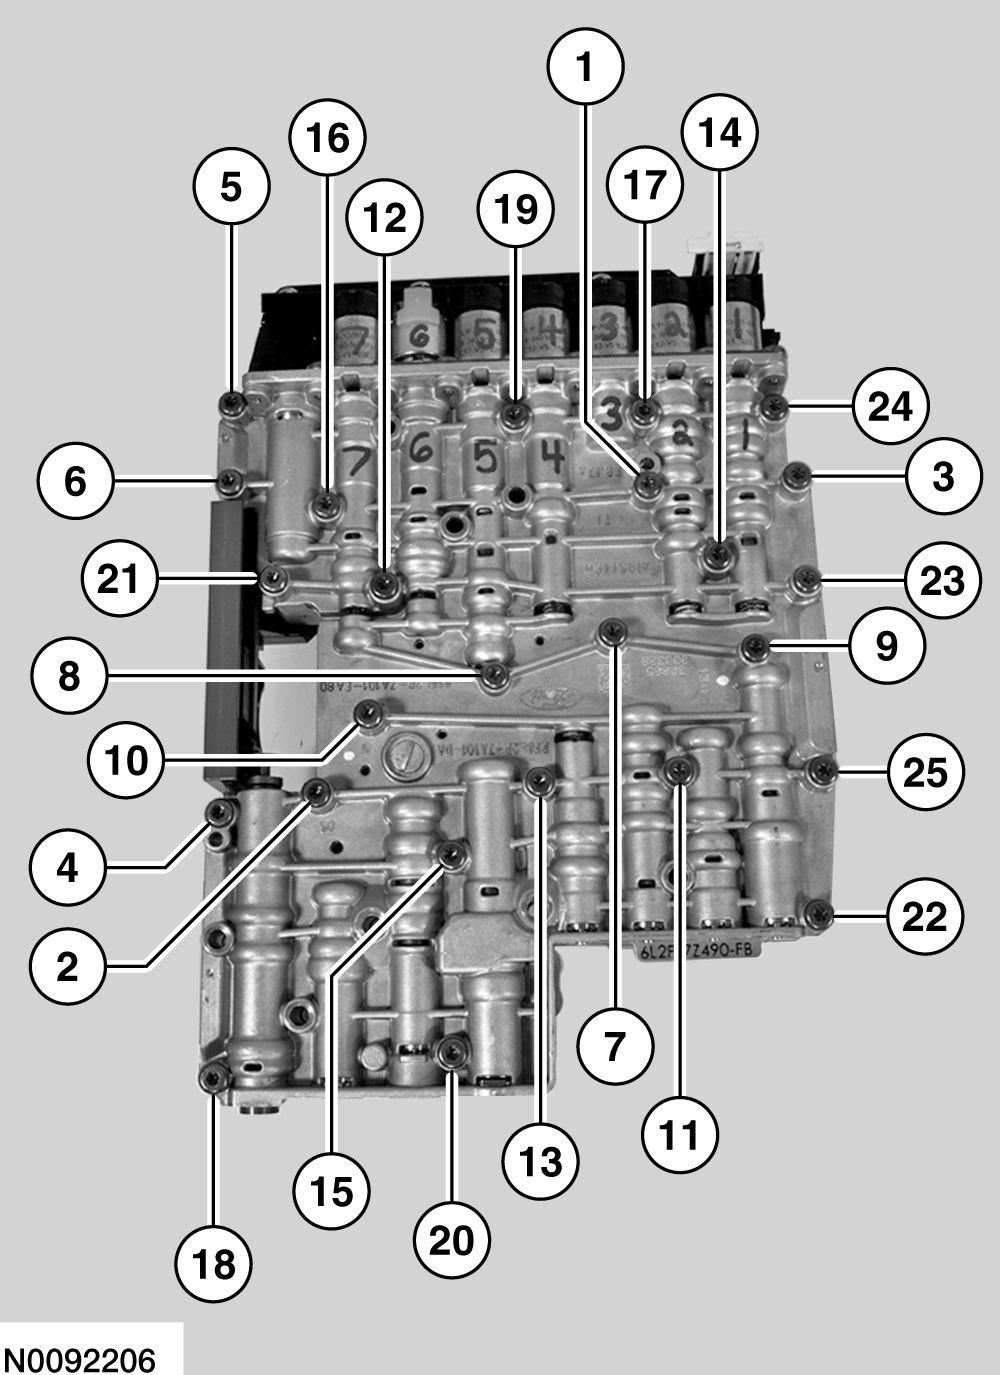 body bolts. Tighten the bolts in the sequence shown.